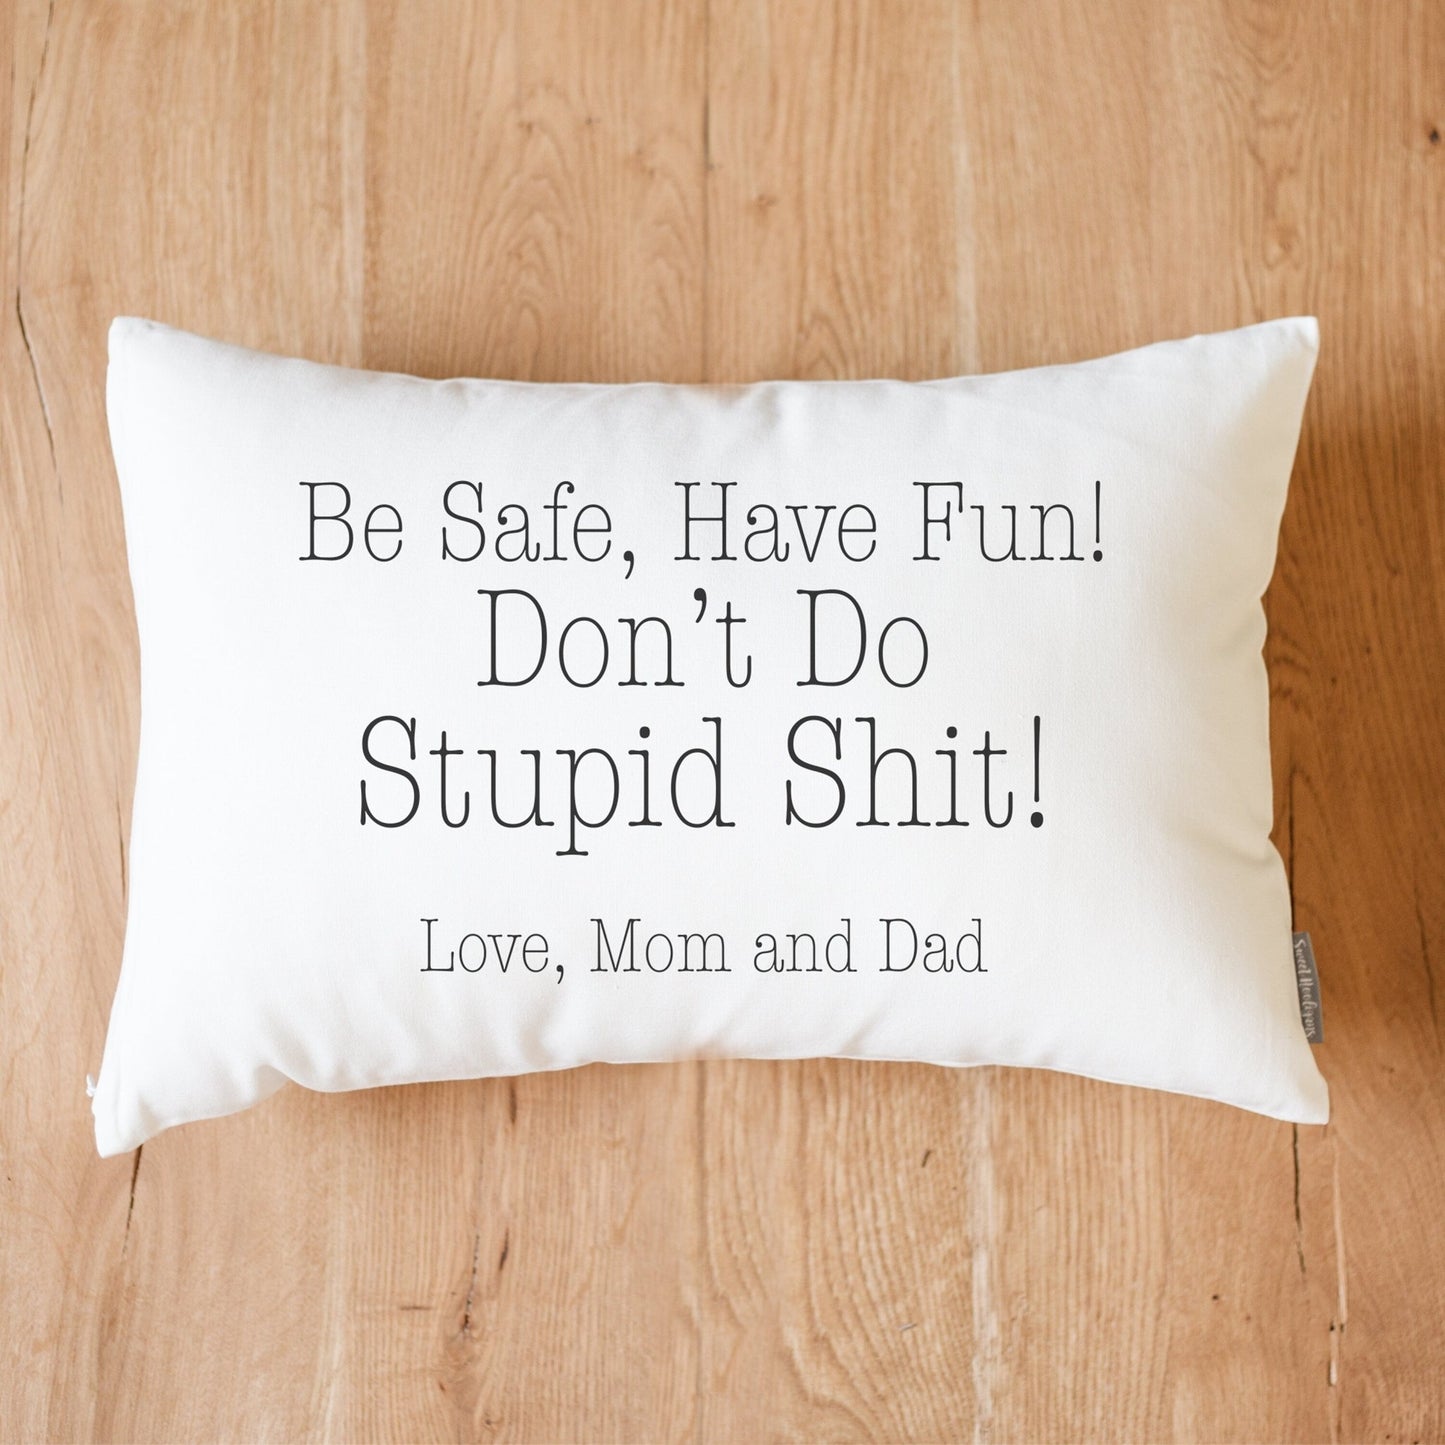 https://sweethooligans.design/cdn/shop/products/be-safe-have-fun-dont-do-stupid-shit-dorm-pillow-dorm-decor-going-away-gift-gift-for-son-gift-for-daughter-college-dorm-gift-311900_1445x.jpg?v=1668882664